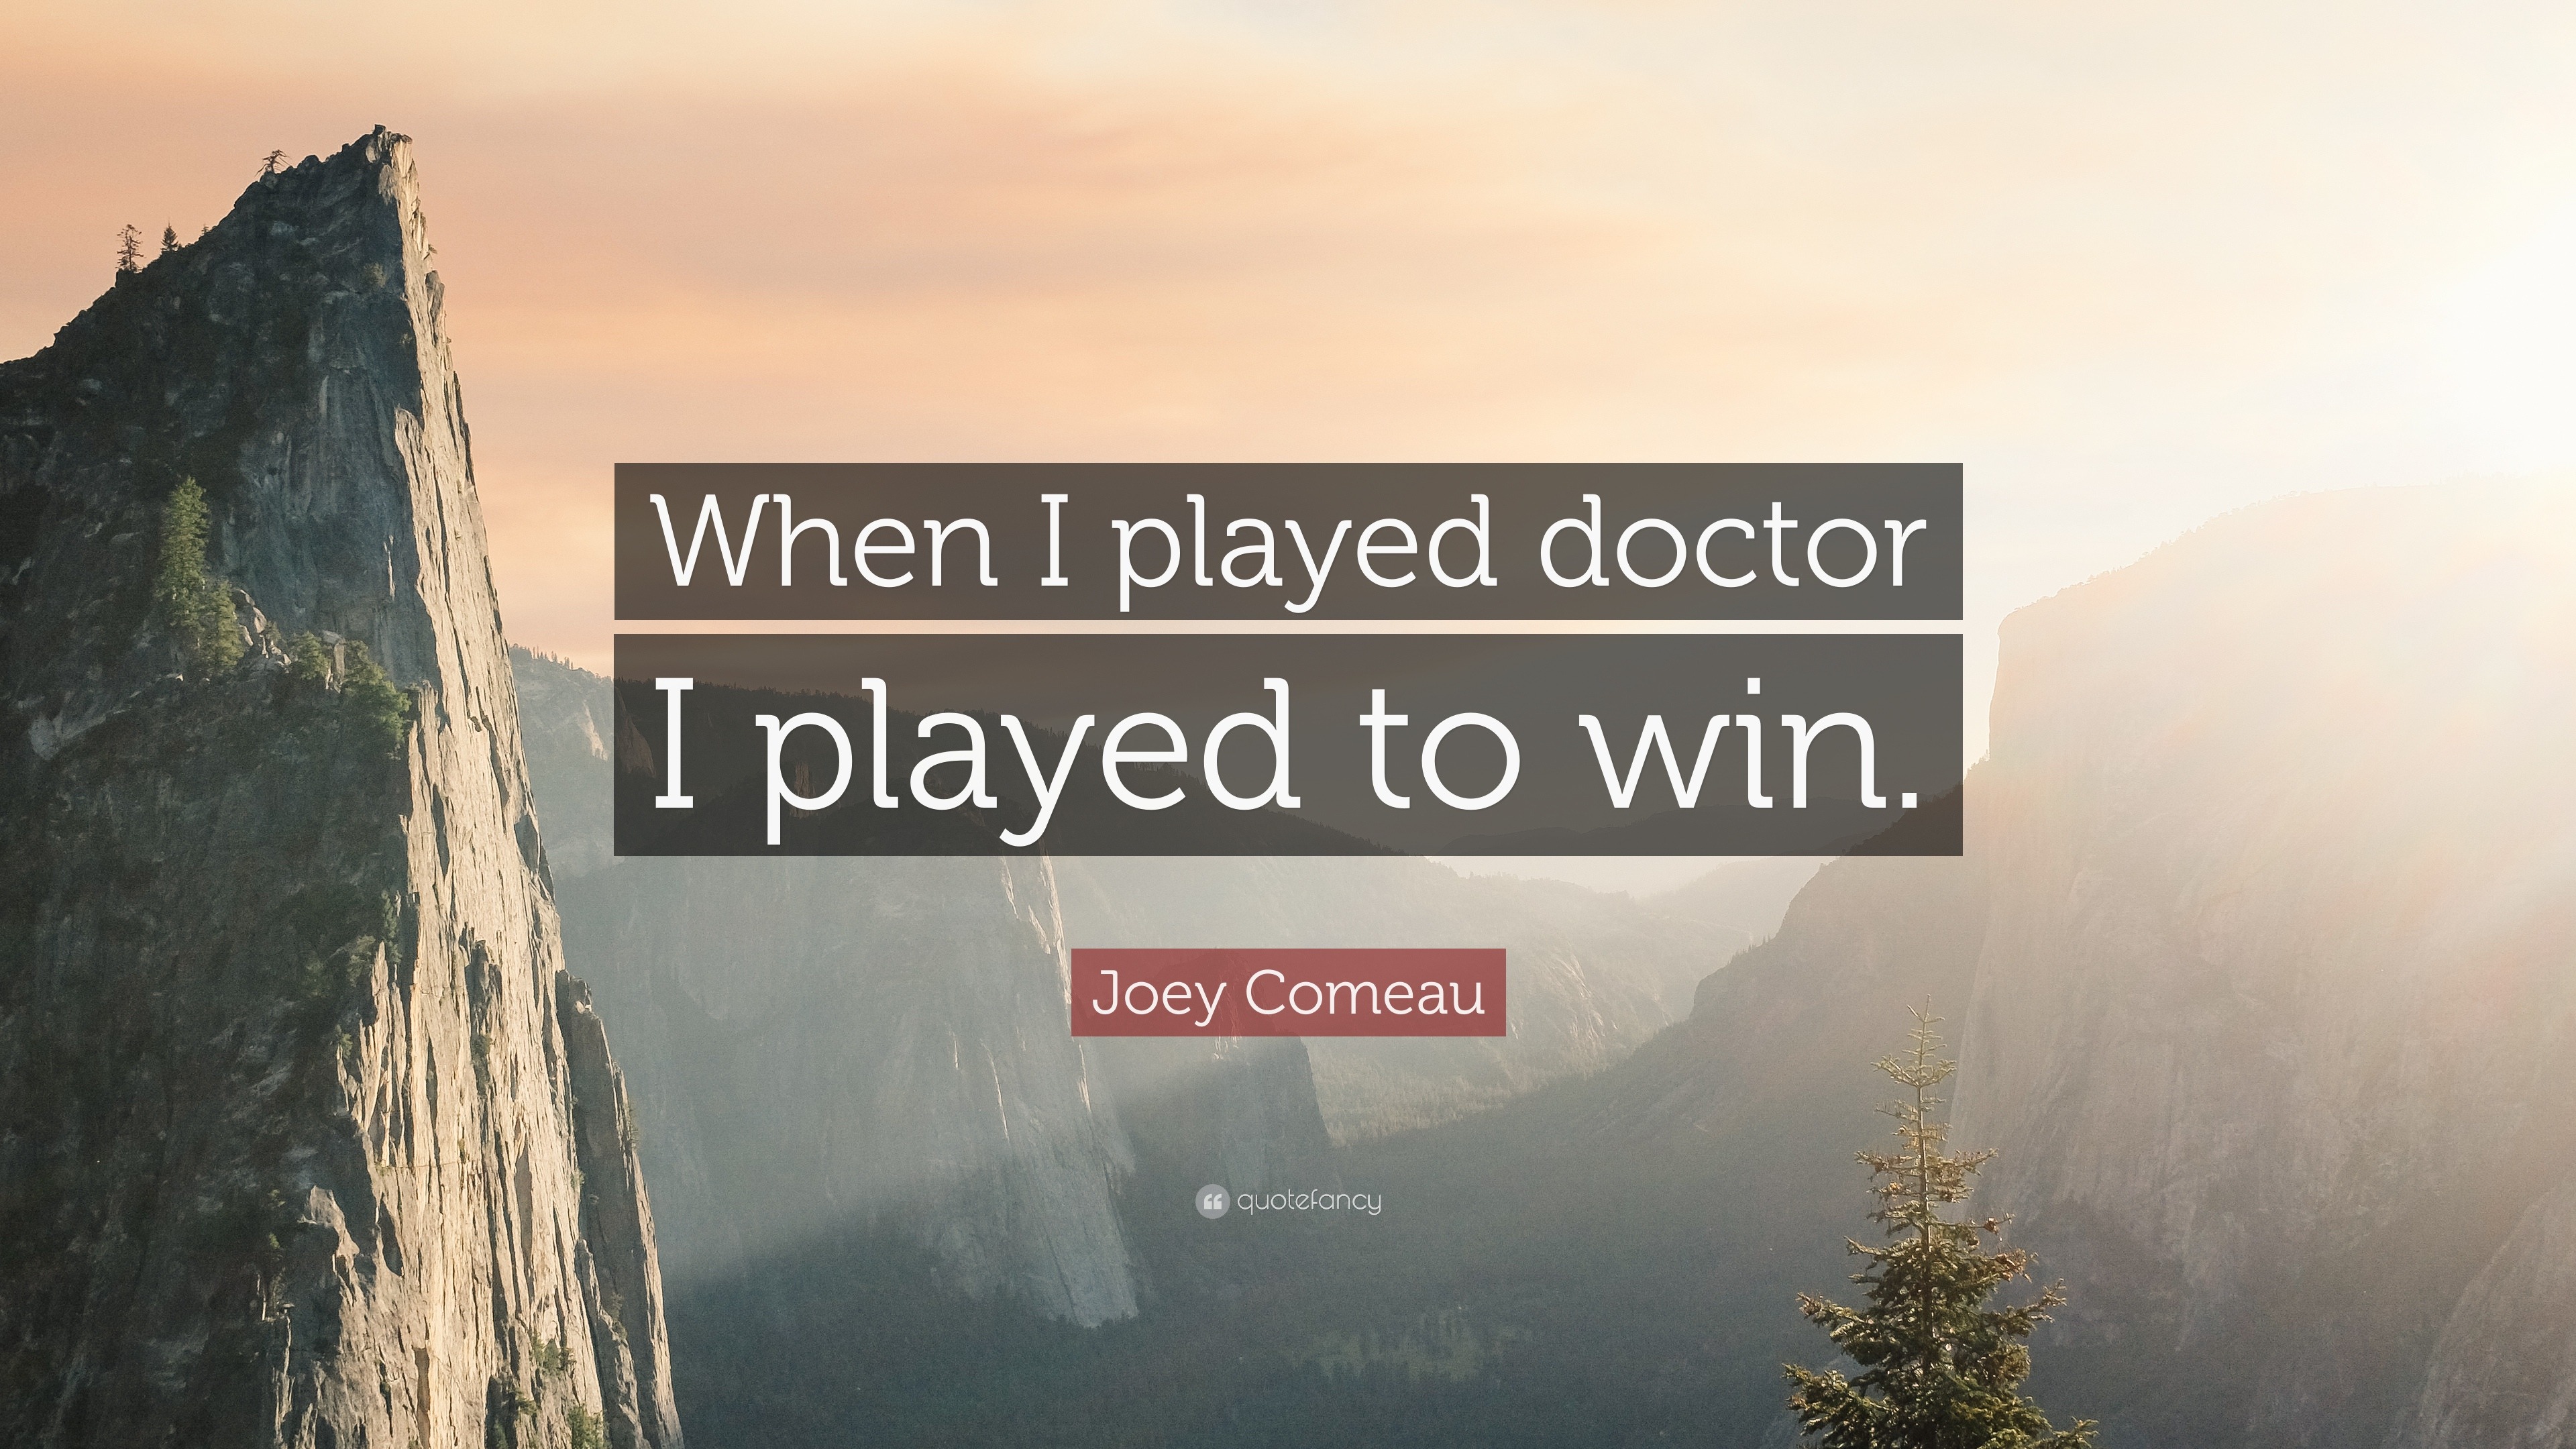 https://quotefancy.com/media/wallpaper/3840x2160/1165272-Joey-Comeau-Quote-When-I-played-doctor-I-played-to-win.jpg